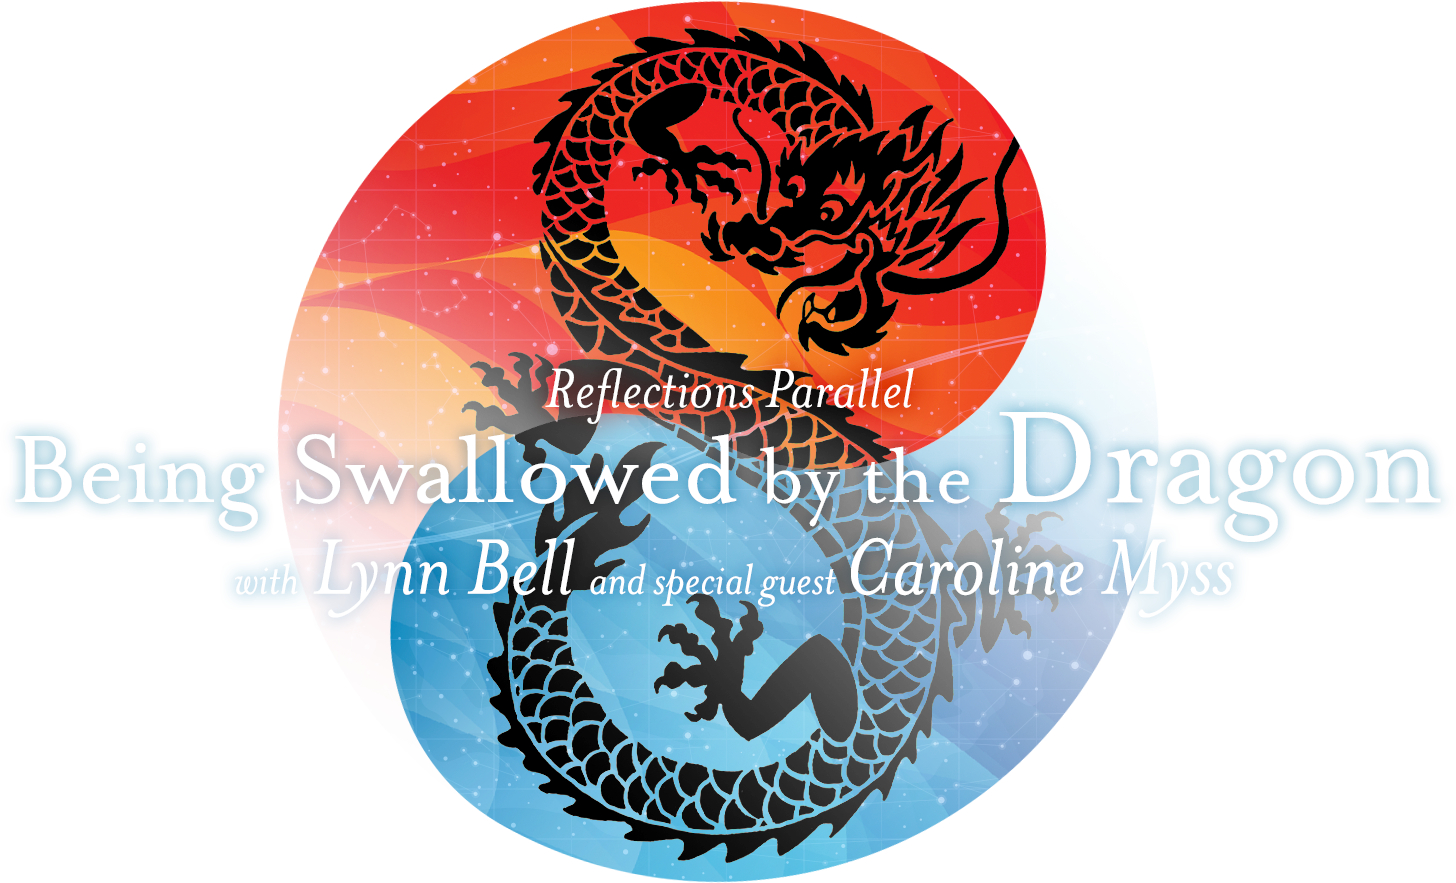 Reflections Parallel: Being Swallowed by the Dragon. presented by Lynn Bell with special guest Caroline Myss.